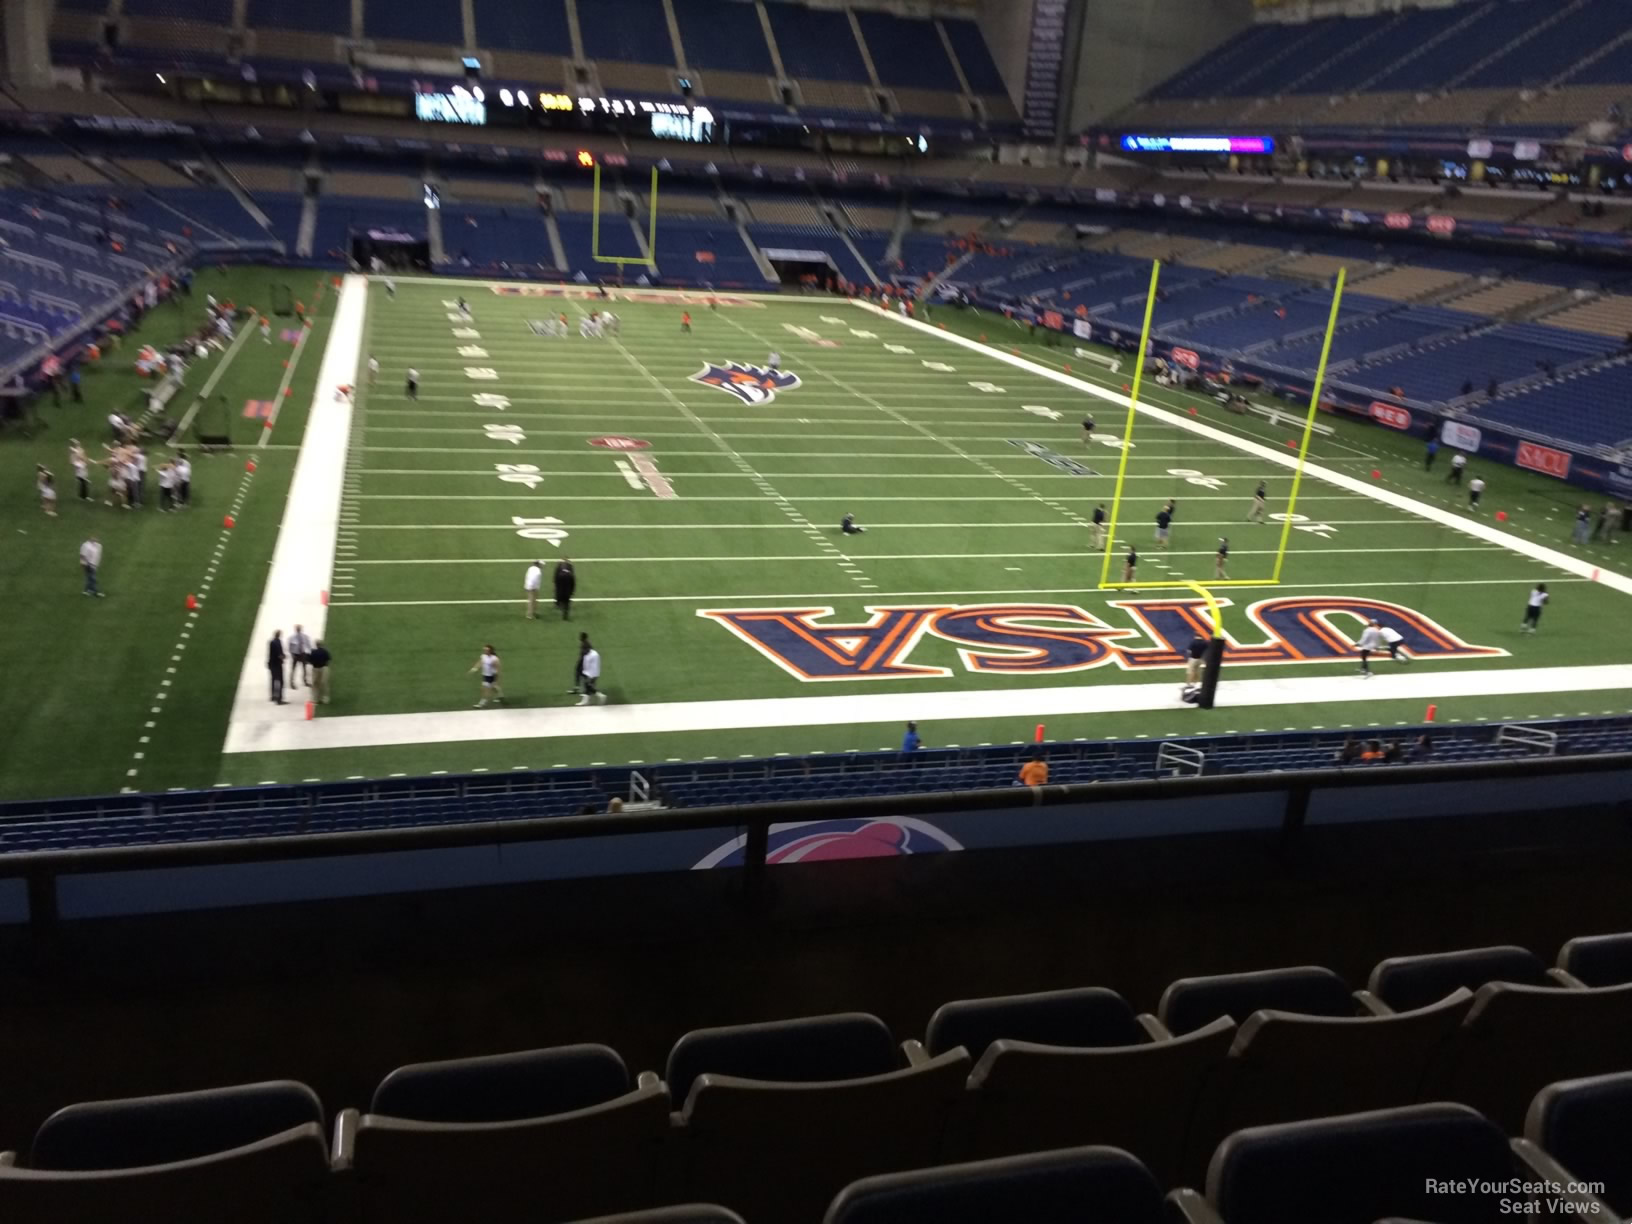 section 203, row 5 seat view  for football - alamodome